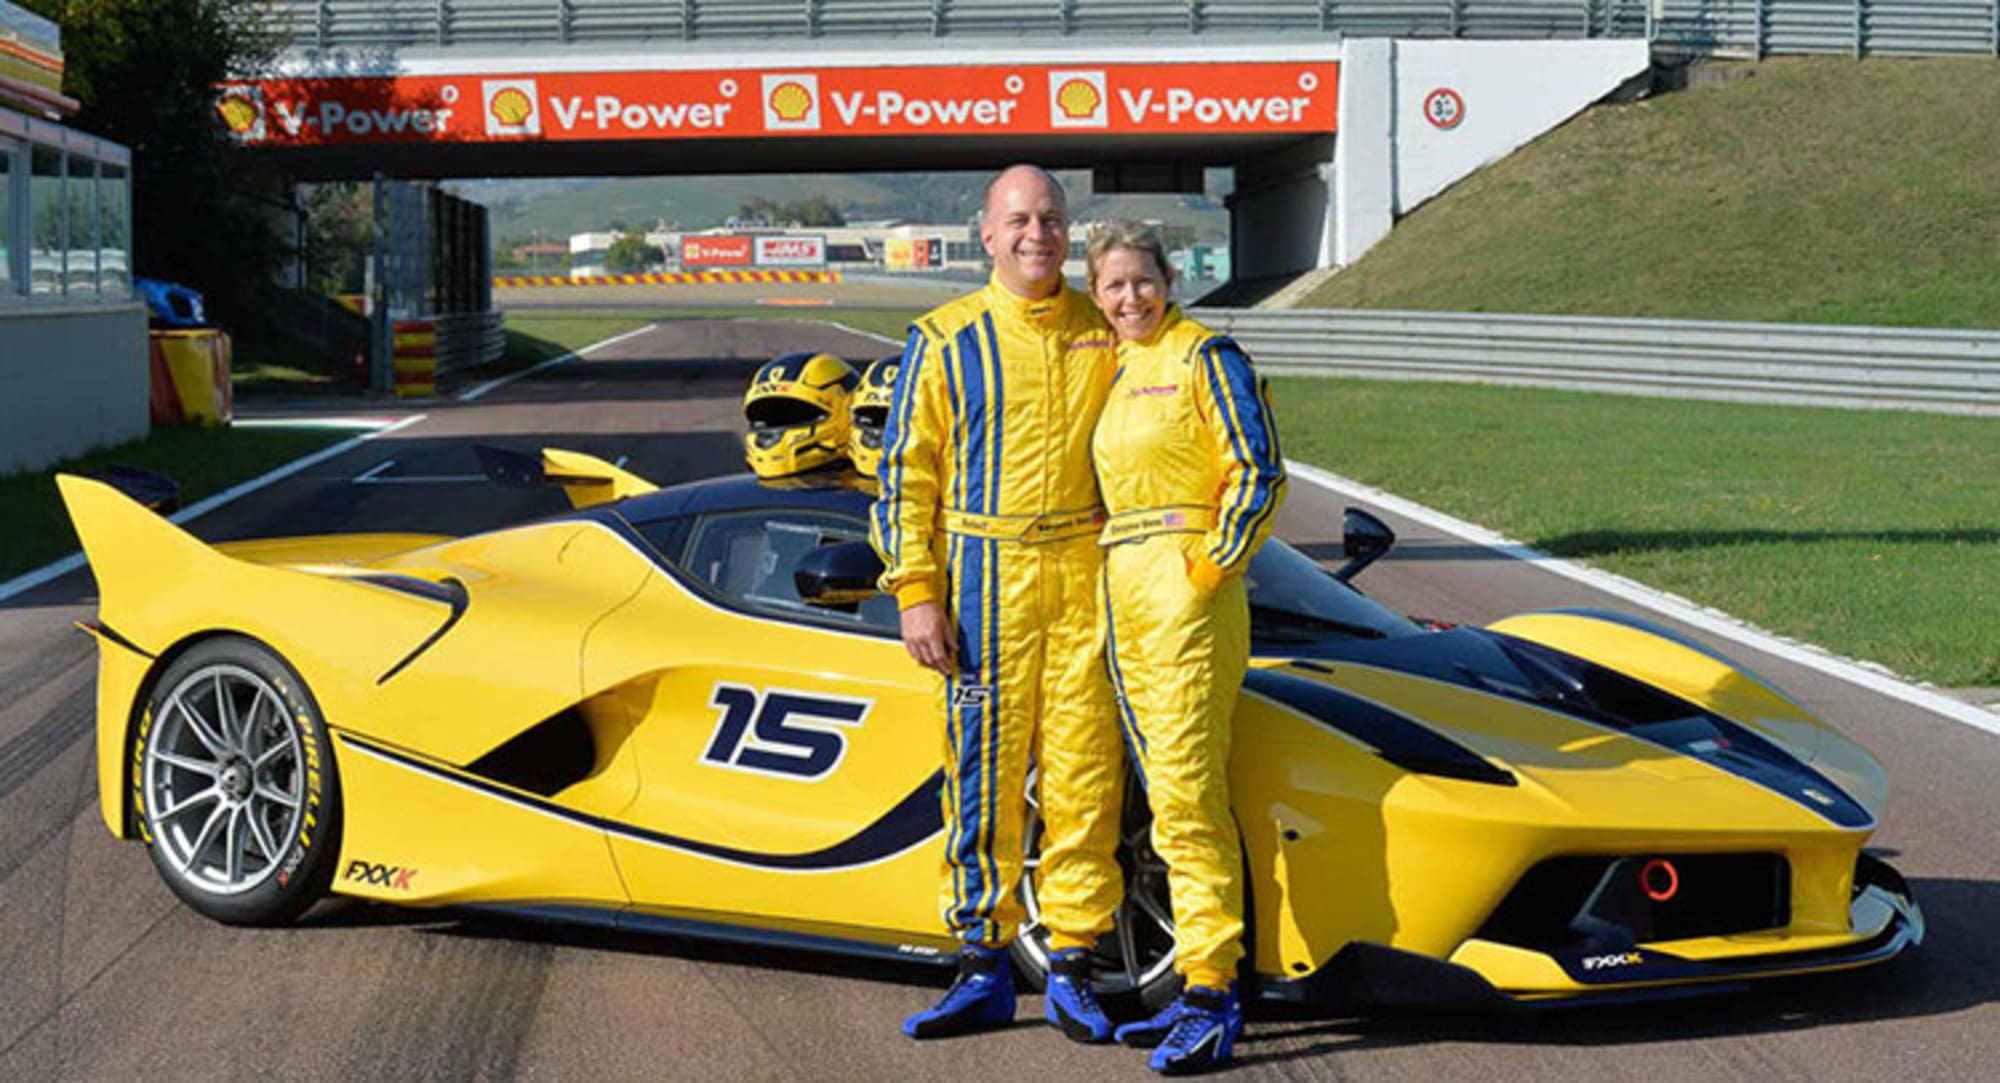 This Google Exec Bought His Wife A Ferrari FXX K For Her Birthday - Art of Gears